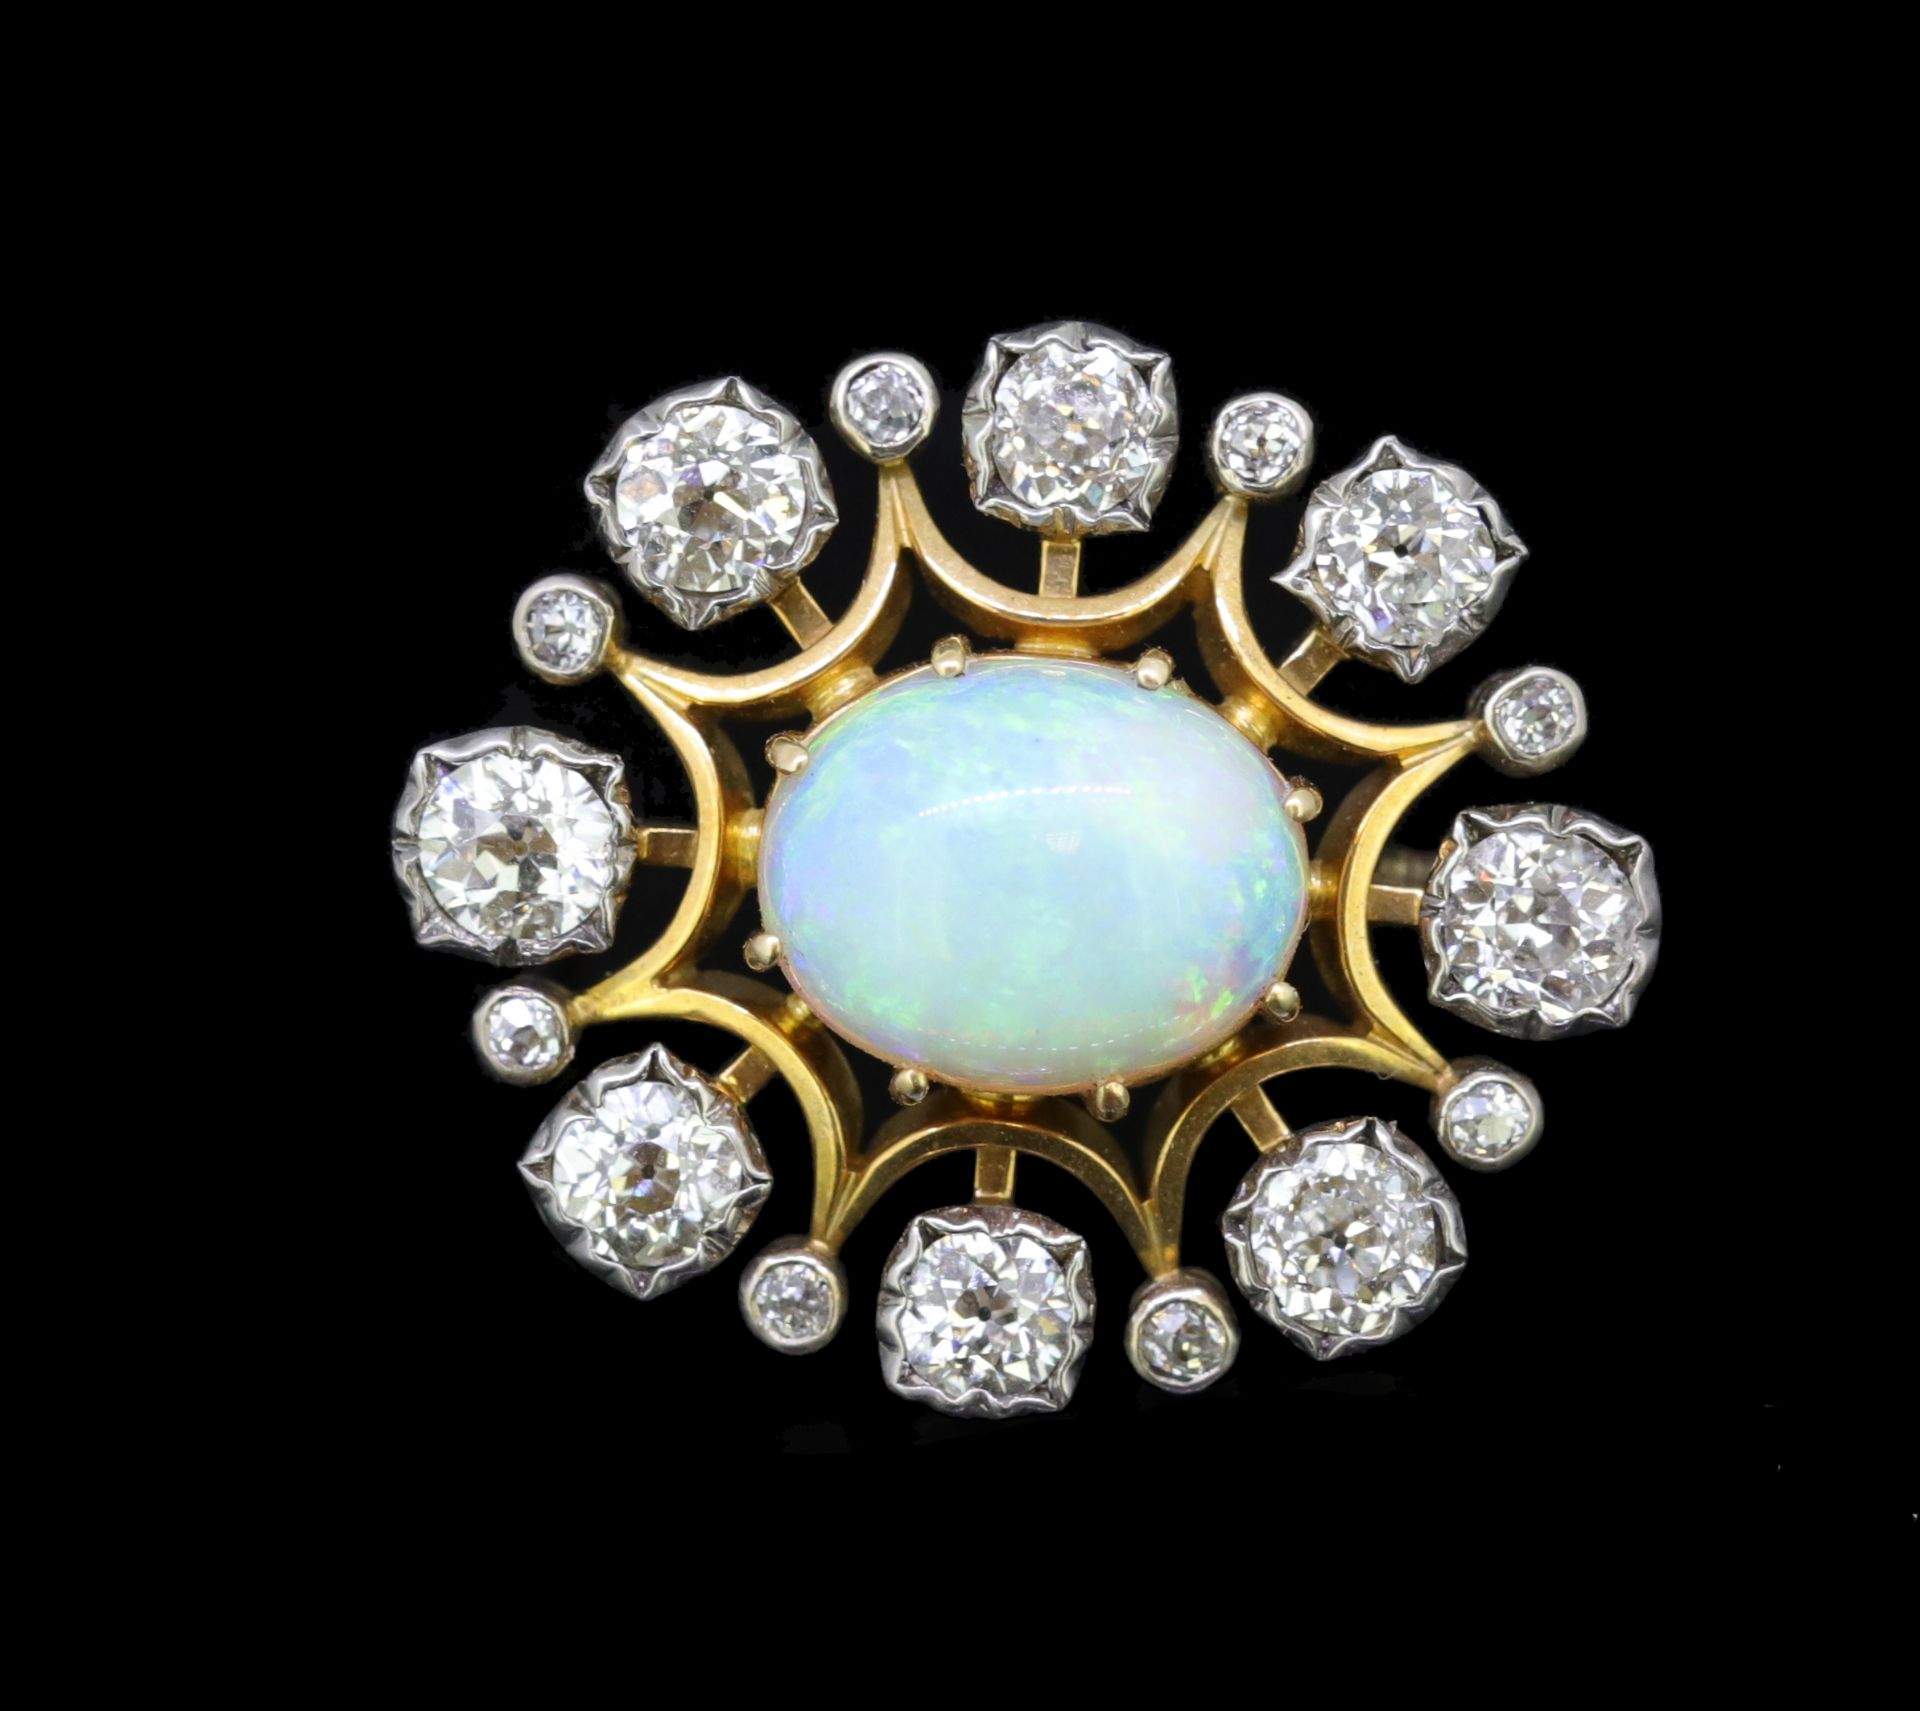 ANTIQUE OPAL AND DIAMOND BROOCH